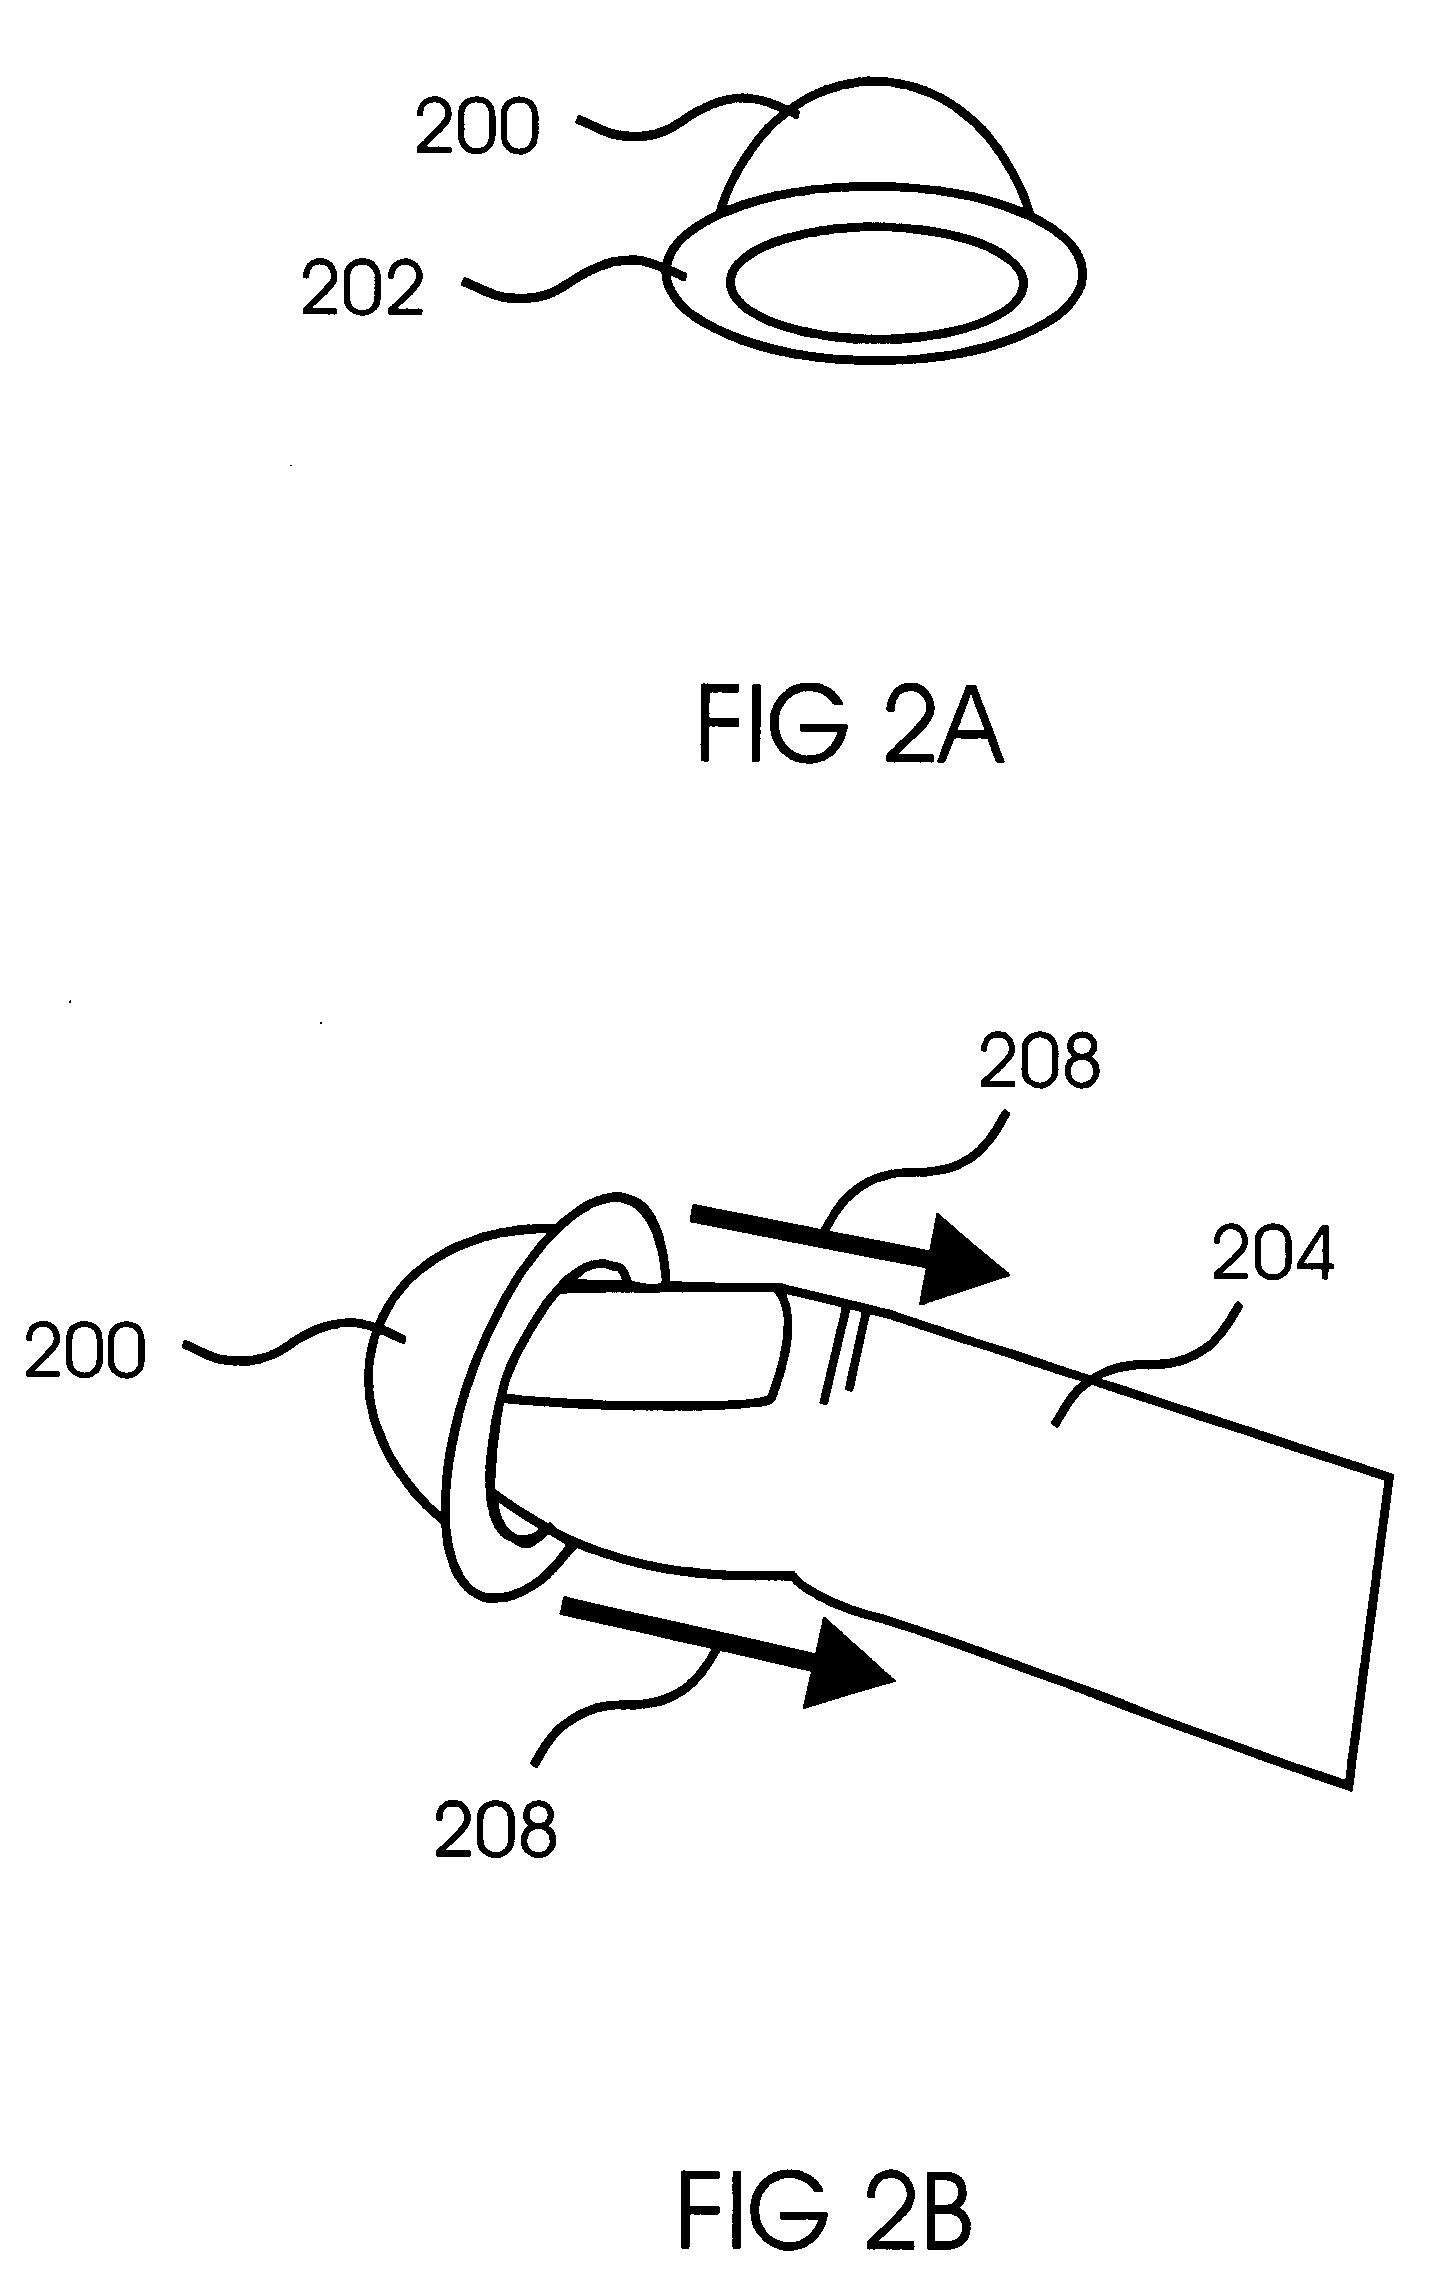 Apparatus and method for holding and manipulating dental floss